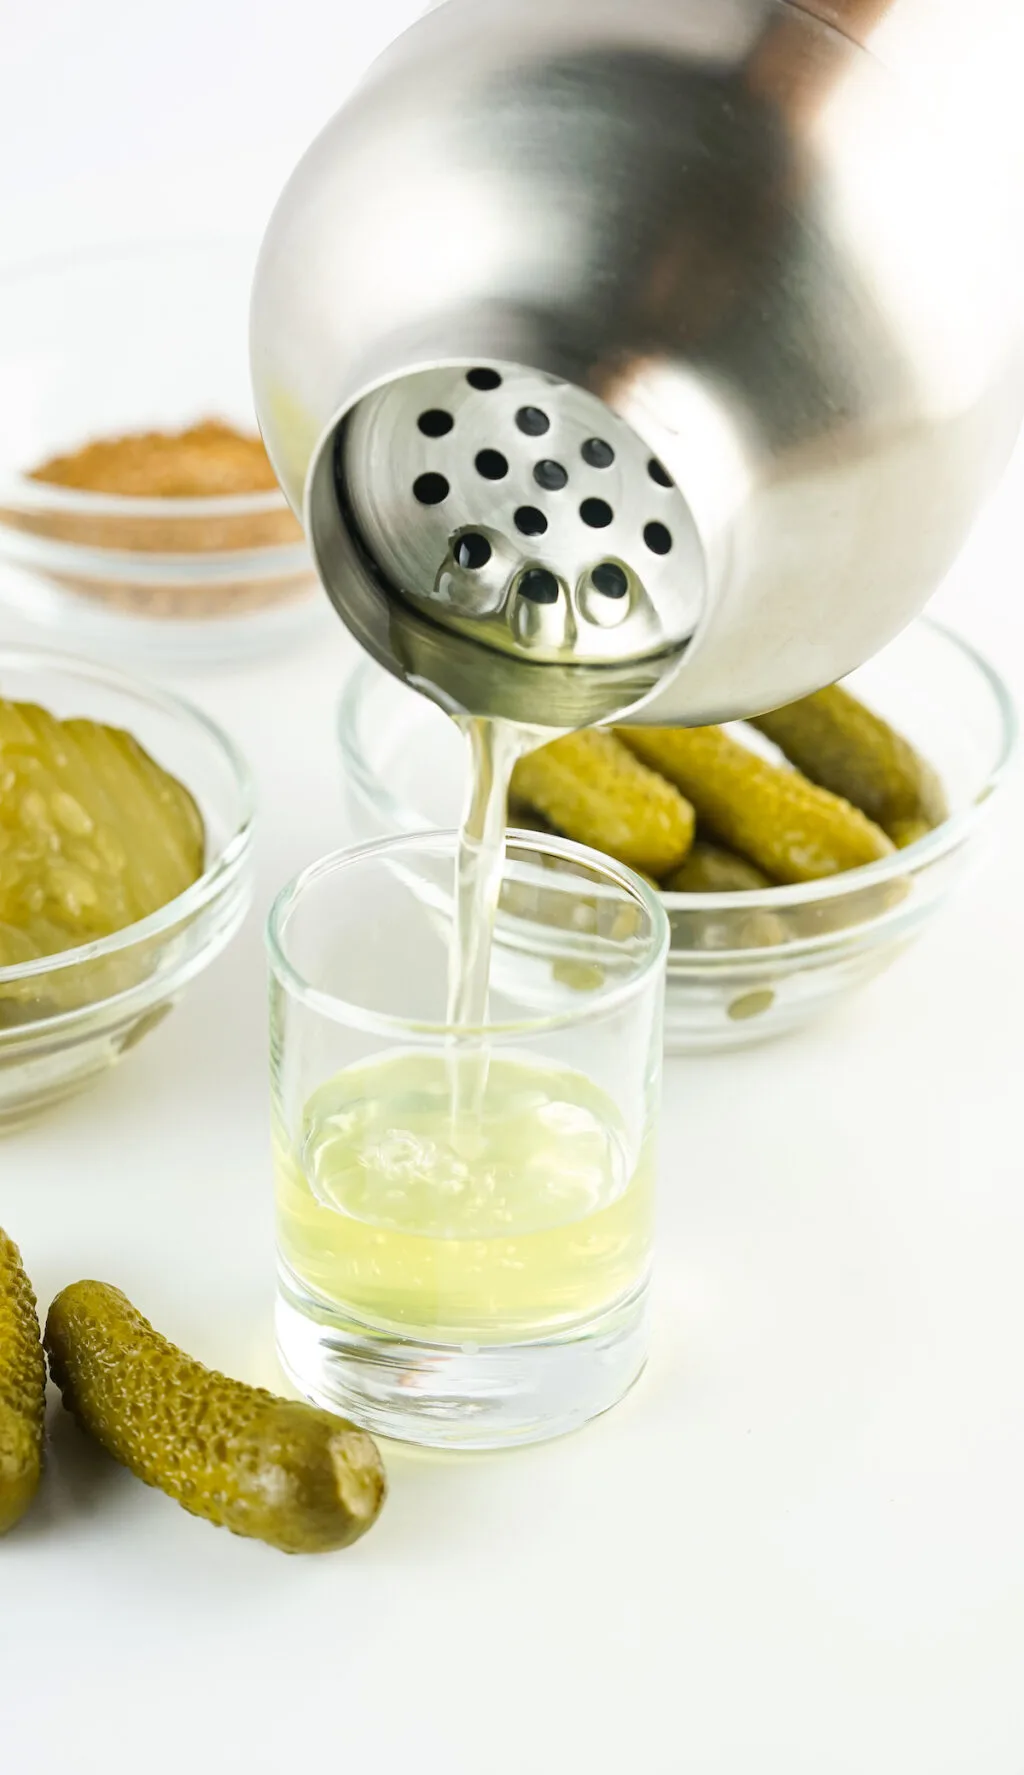 pickle shot being poured into shot glass